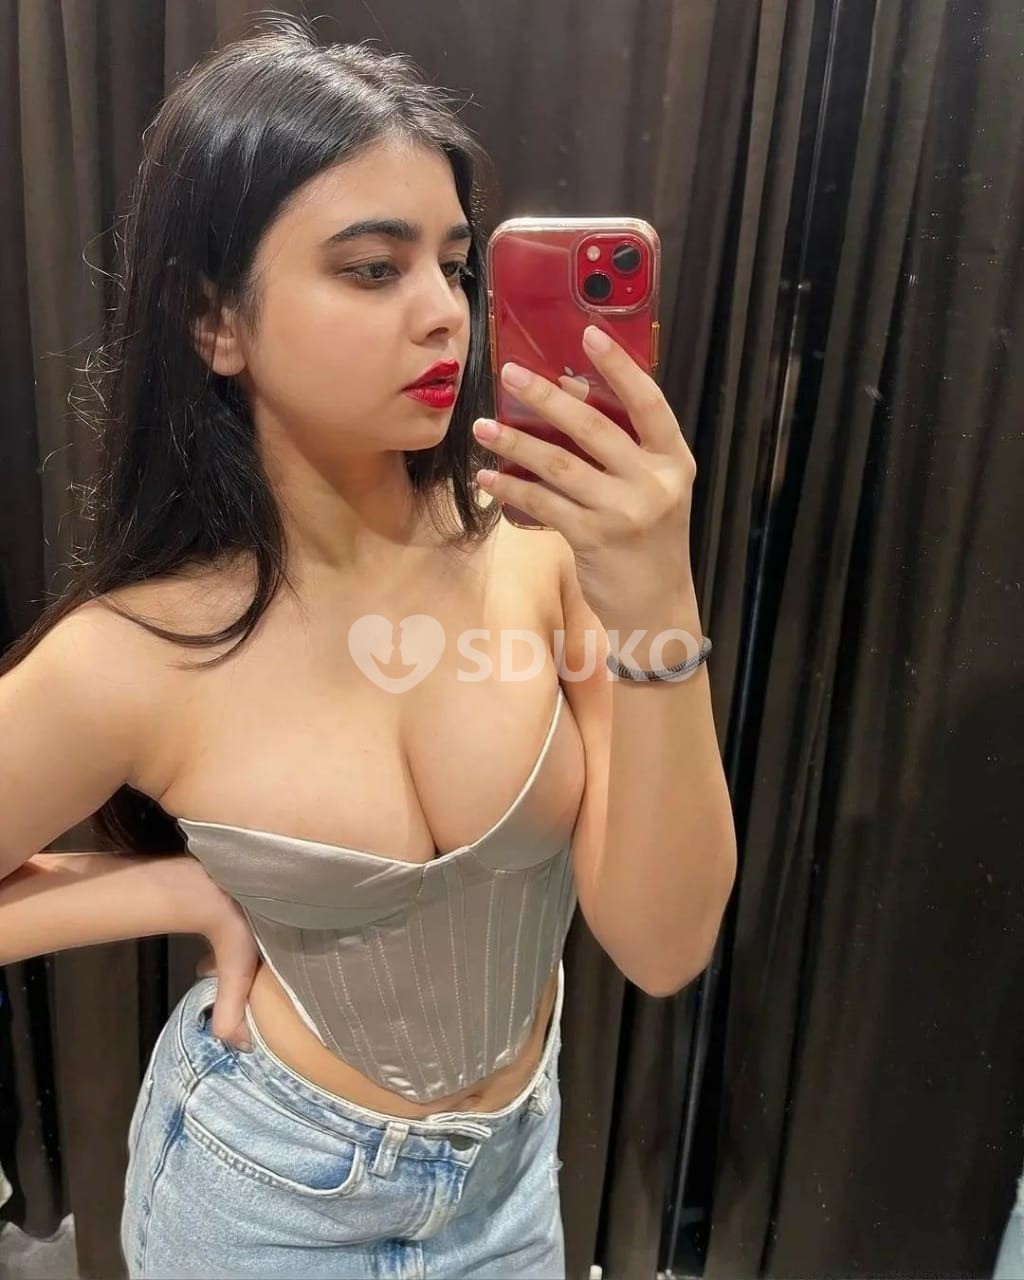 CHAKAN VIP TODAY LOW PRICE 🔅;!ESCORT 🥰SERVICE 100% SAFE AND SECURE ANYTIME CALL ME 24 X 7 SERVICE AVAILABLE 100% S